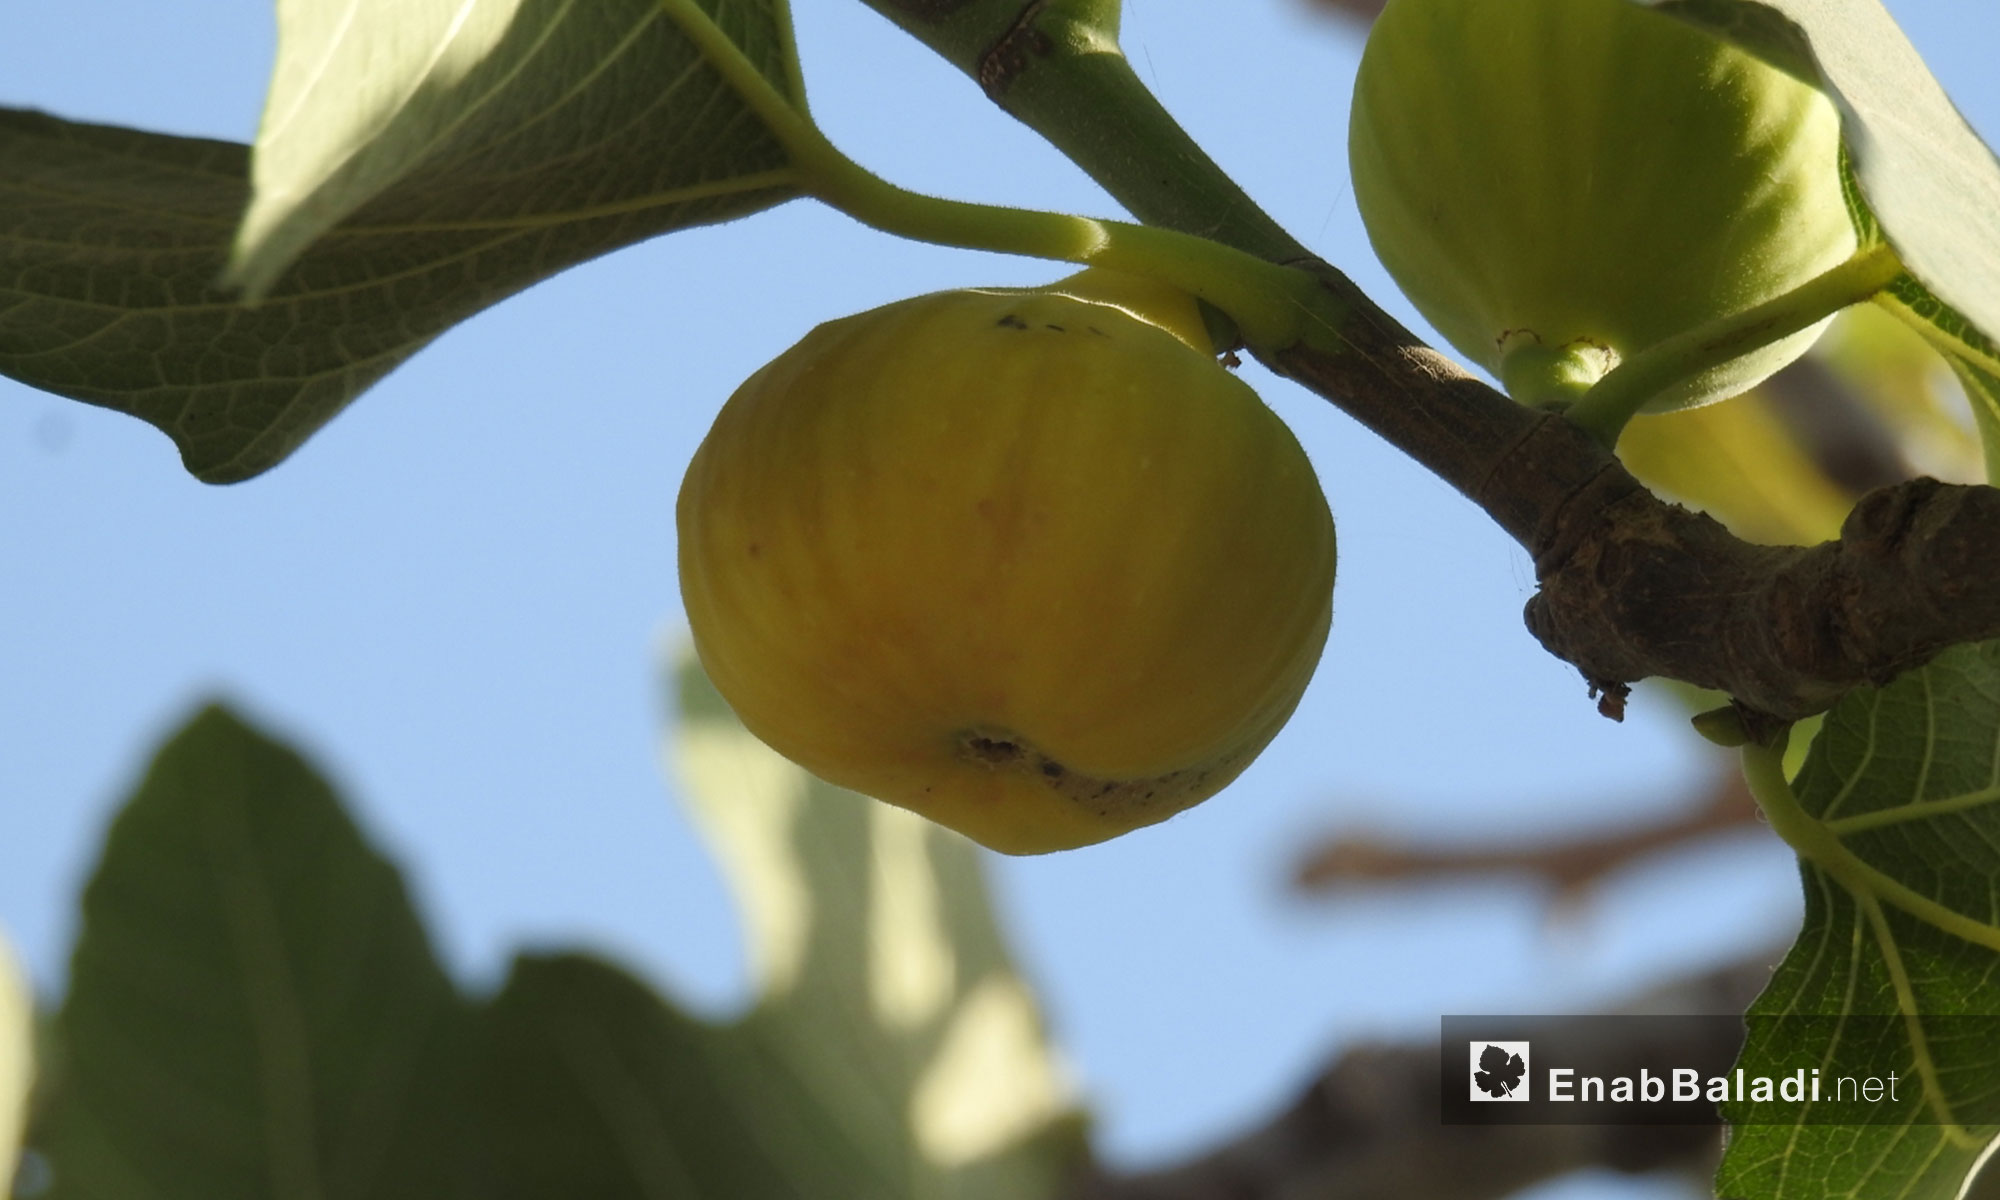 The figs season in the northern countryside of Aleppo – July 24, 2018 (Enab Baladi)